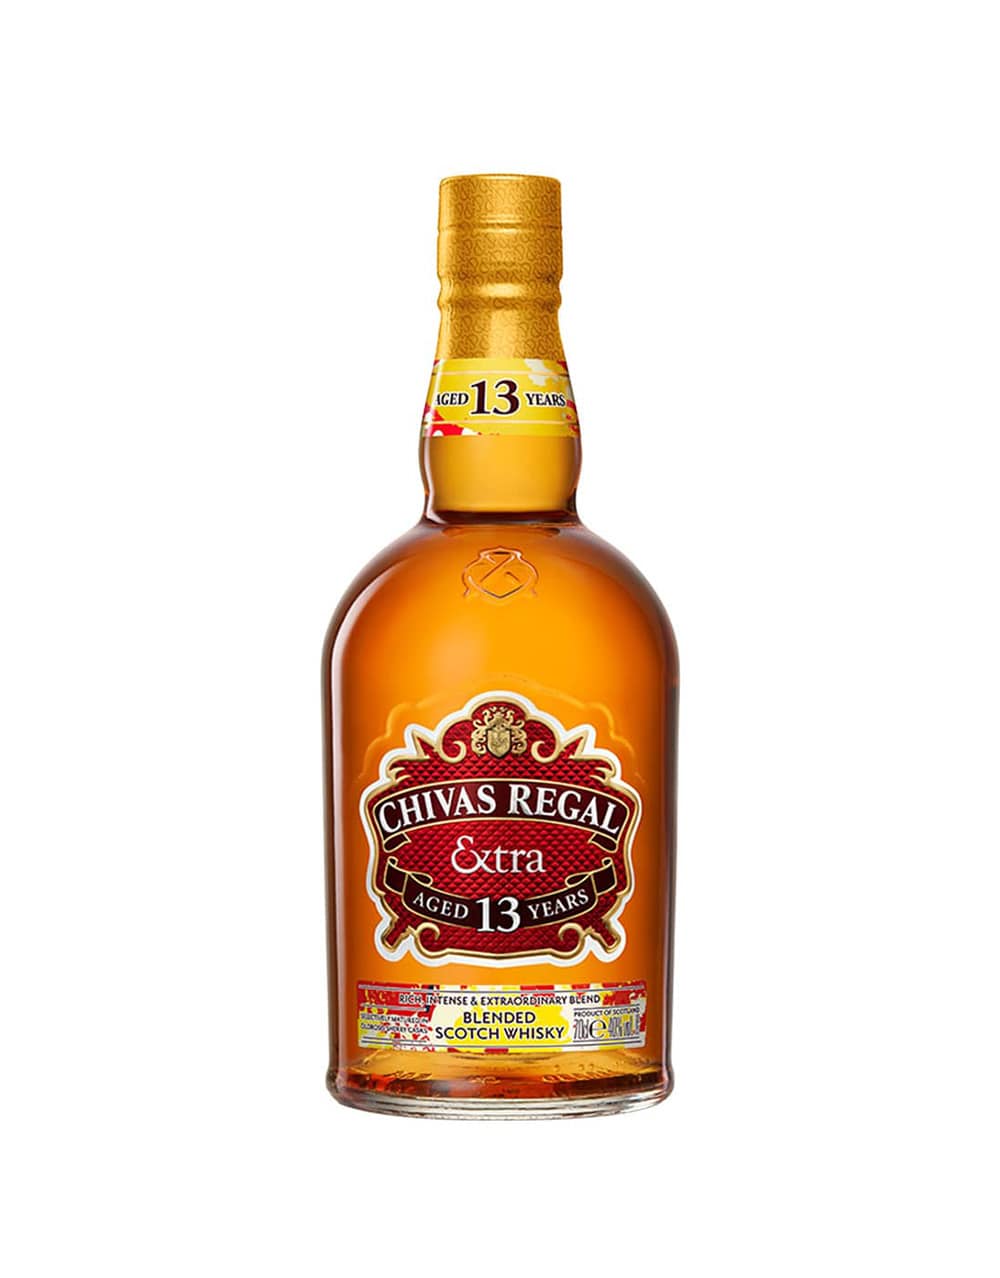 Chivas 13 Year Old Blended Scotch Whisky